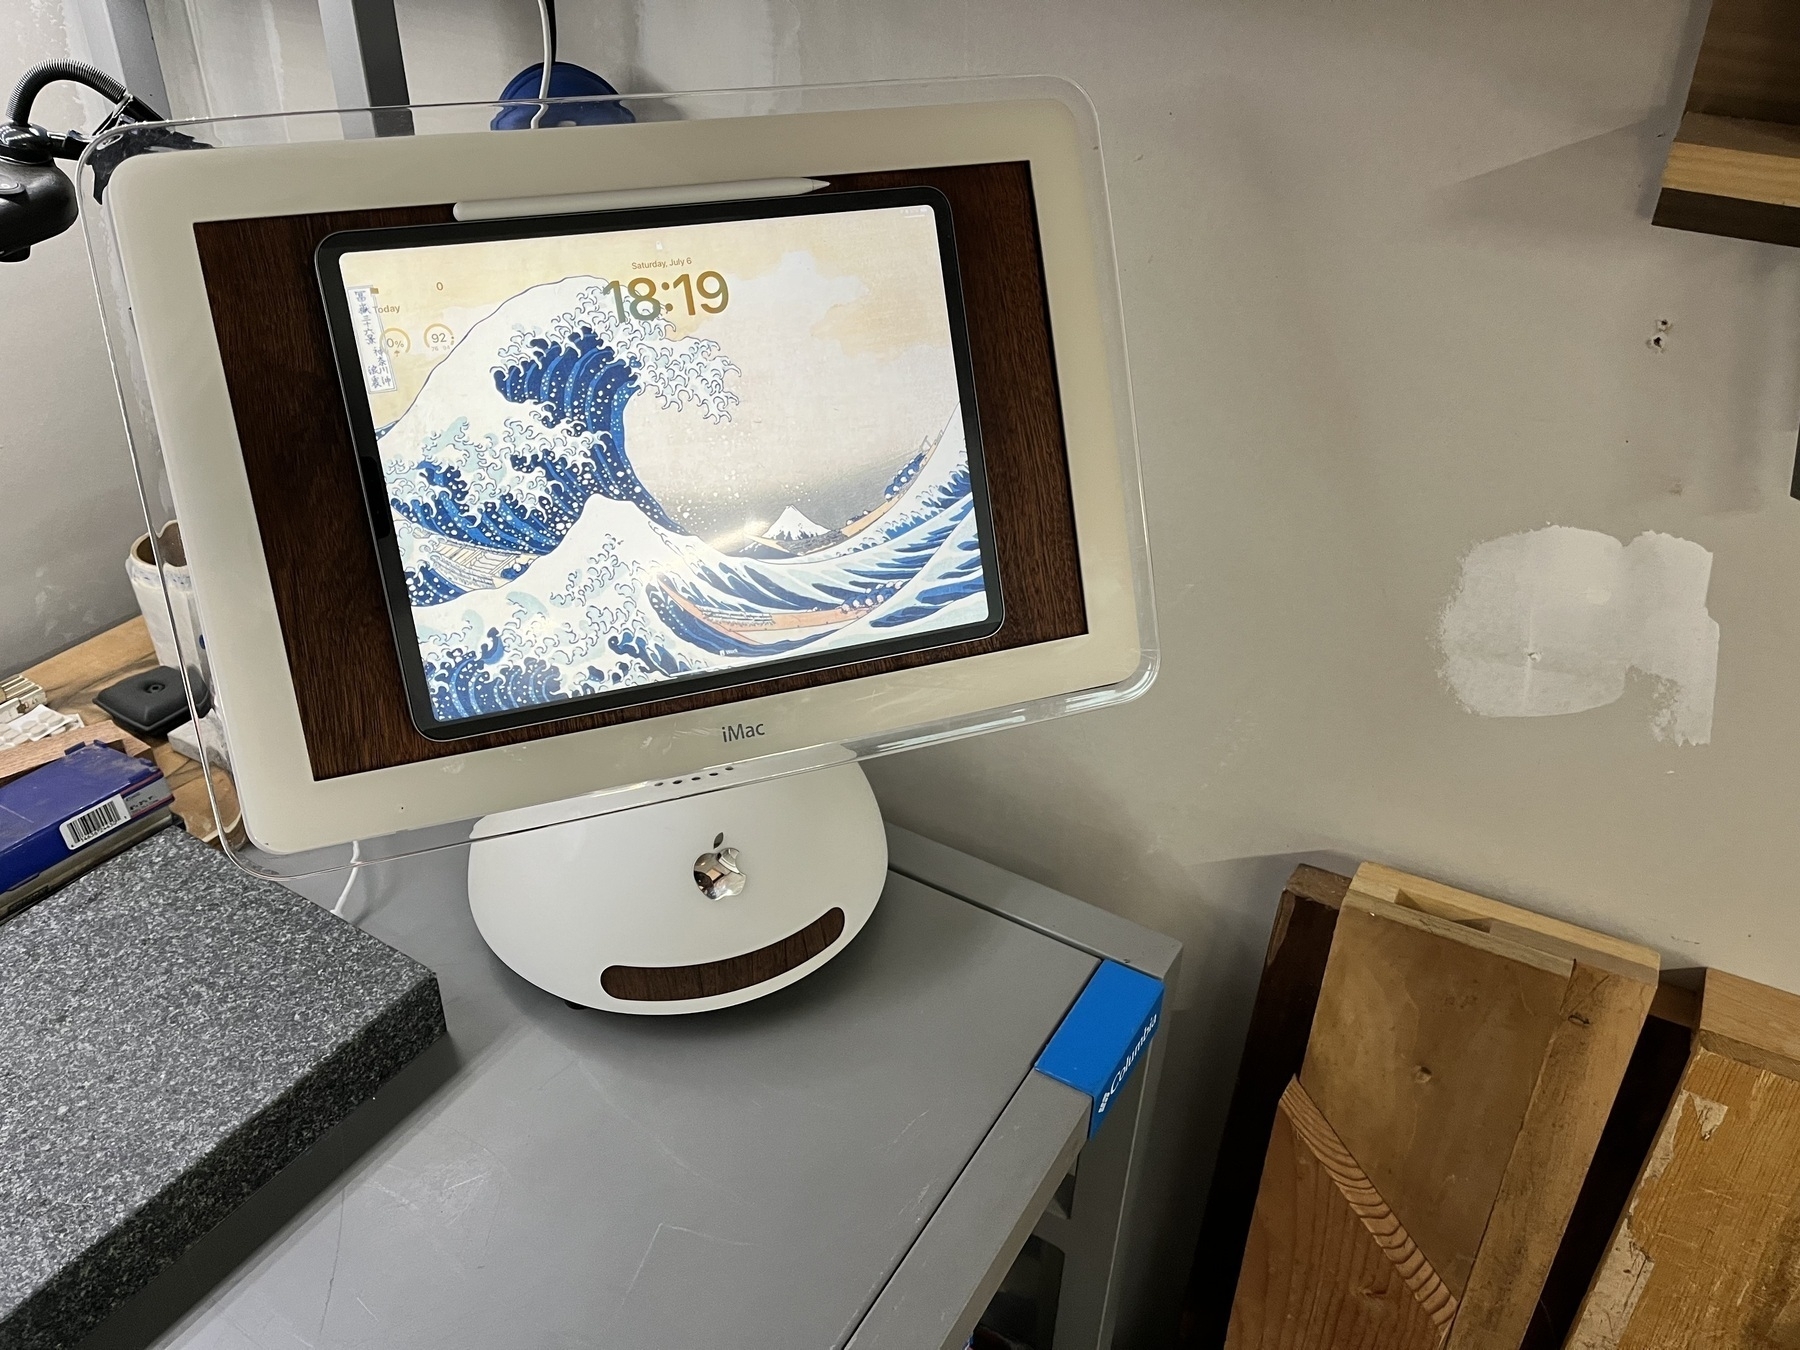 2002 iMac converted to iPad Pro stand